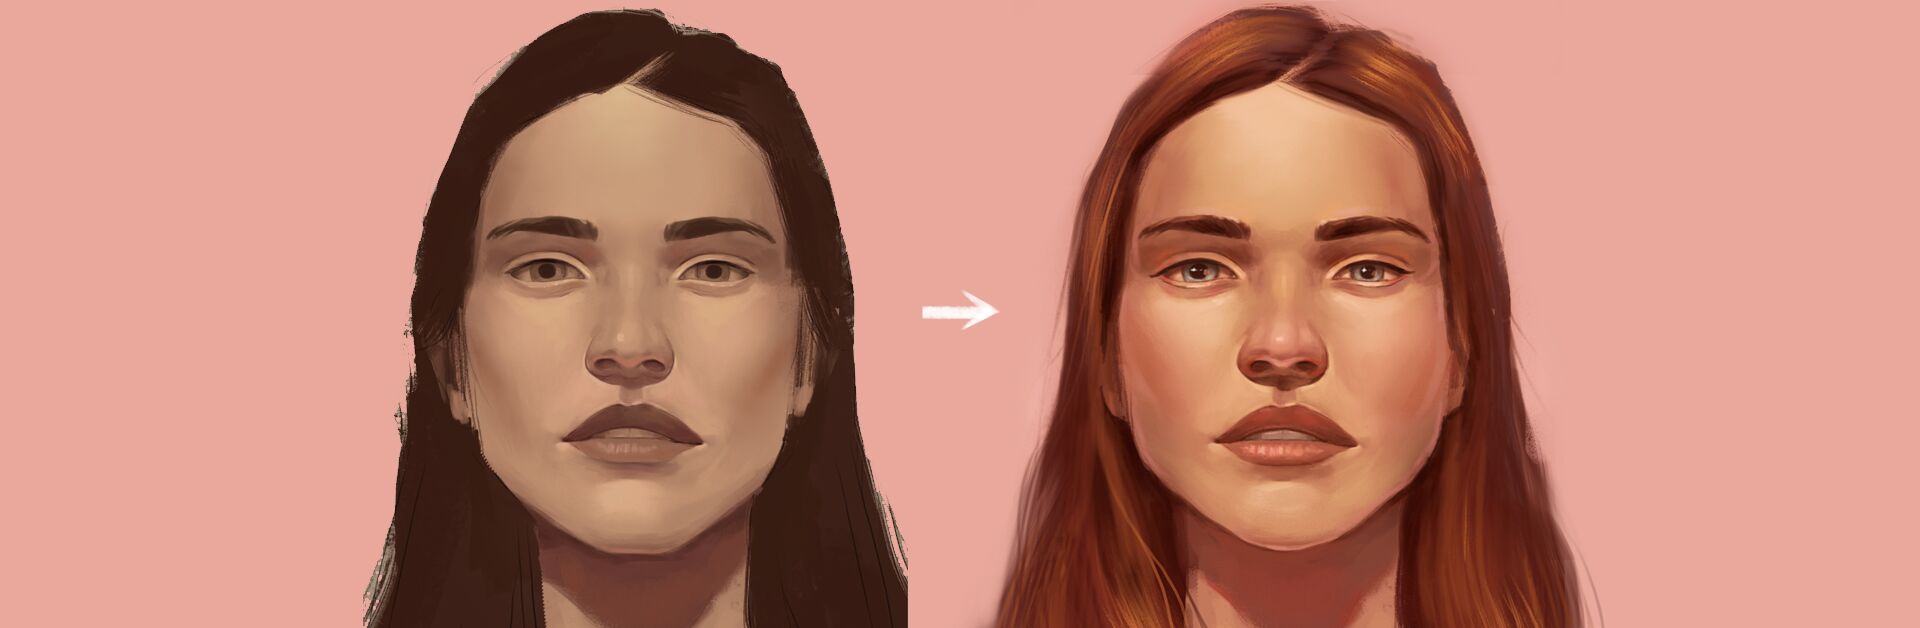 Tips for Coloring Your Digital Painting Portraits